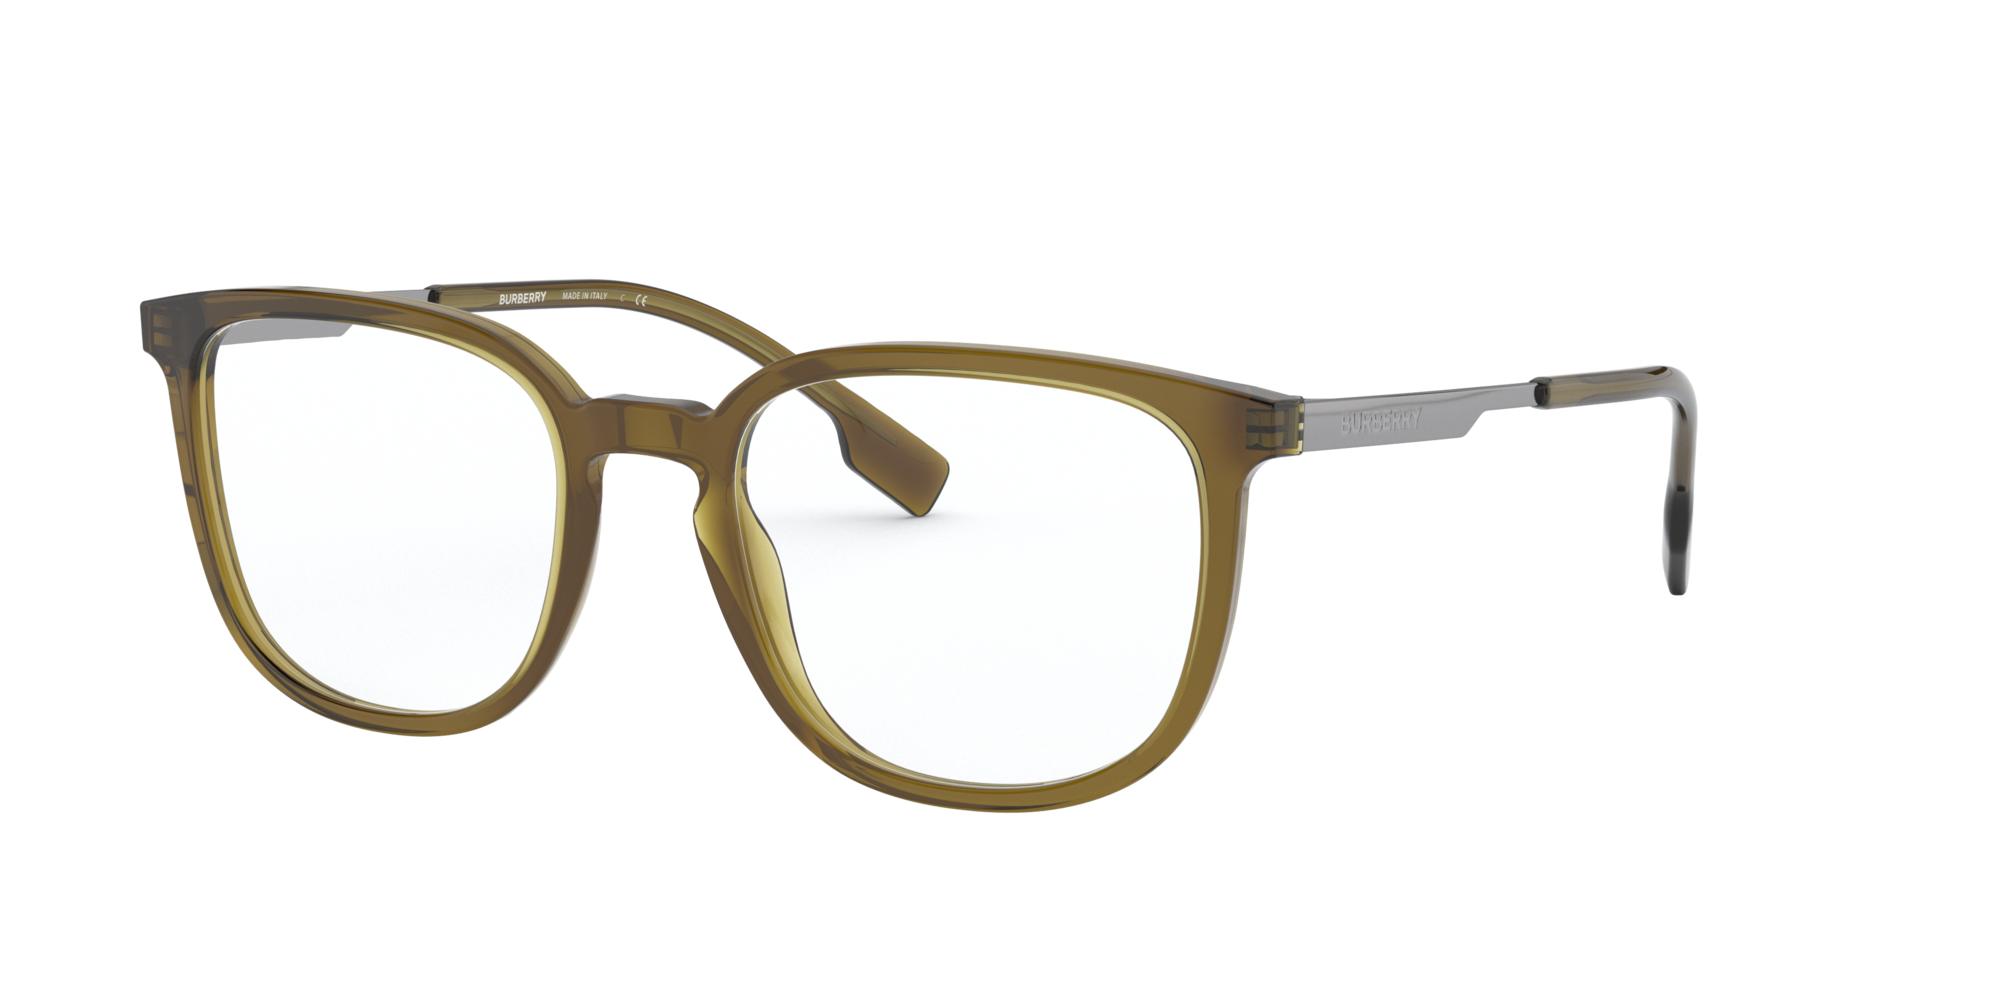 burberry glasses lenscrafters